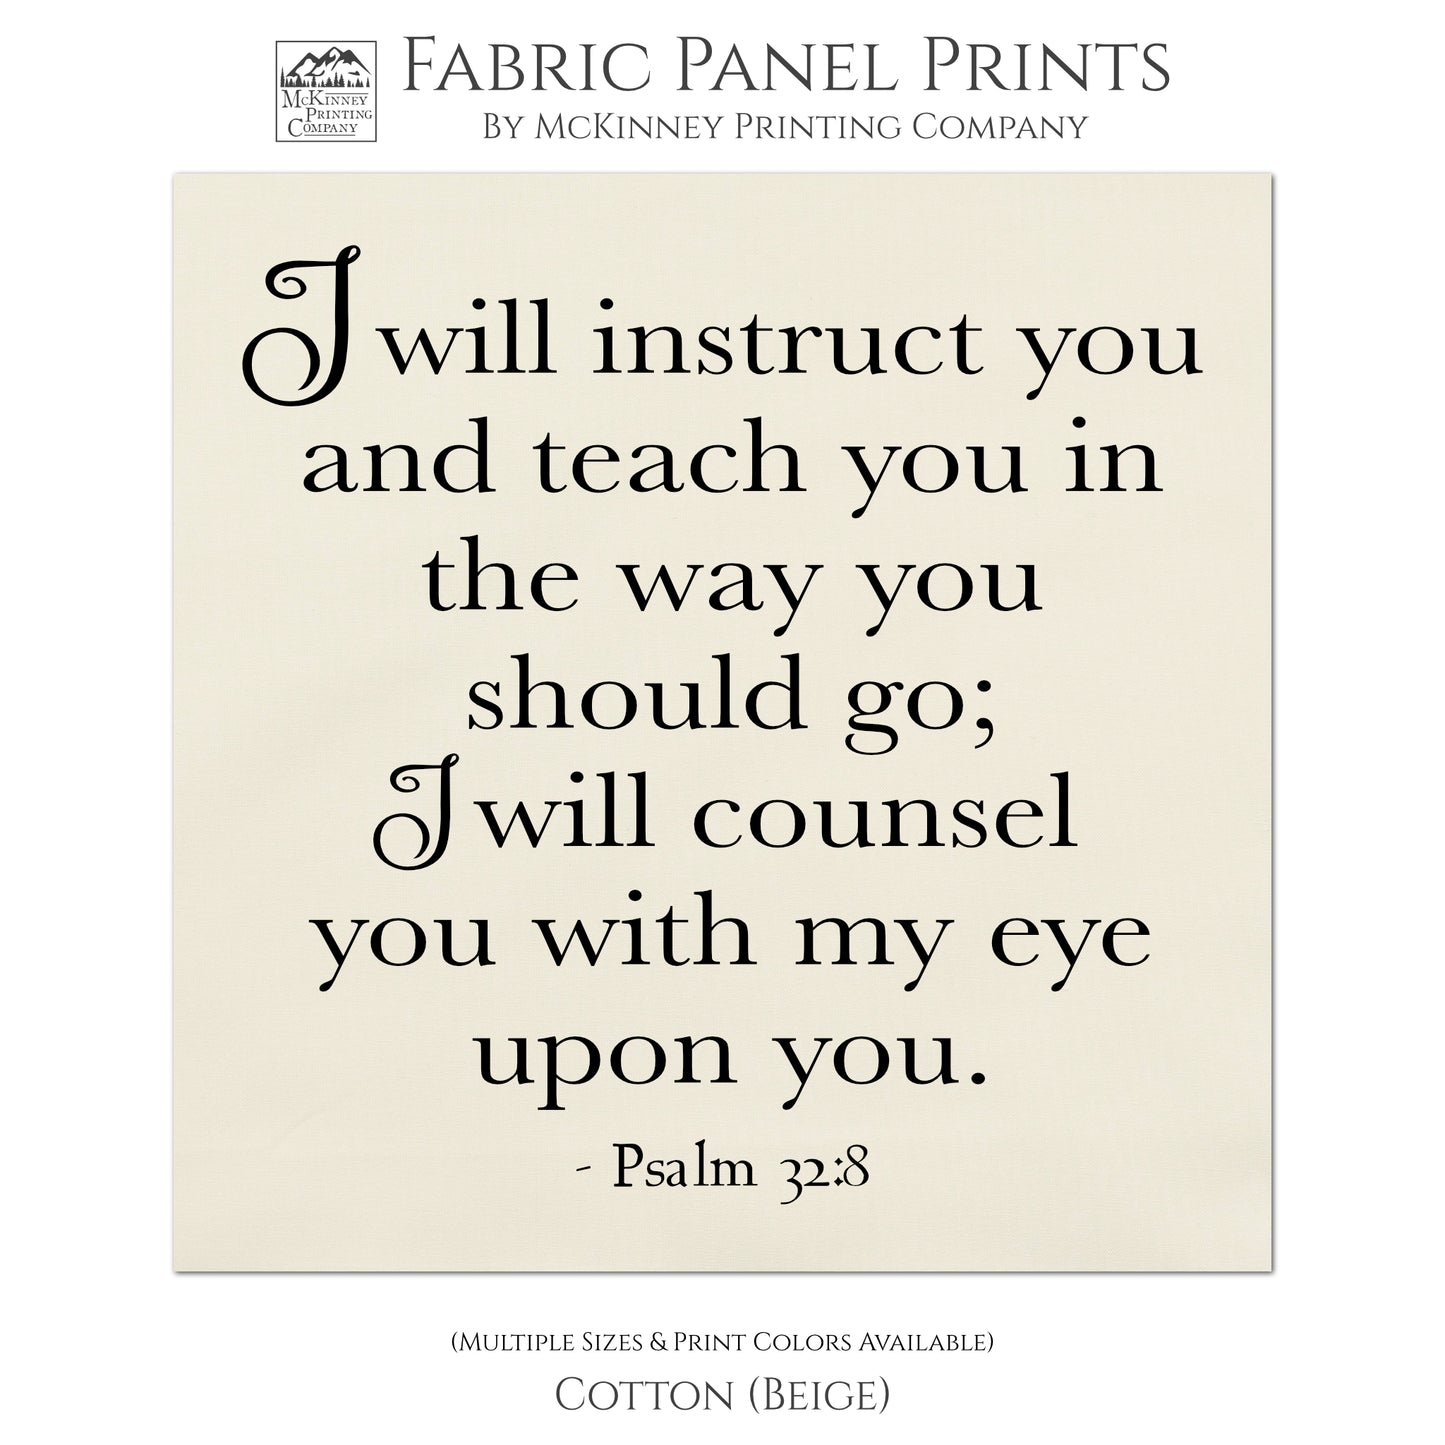 I will instruct you and teach you in the way you should go; I will counsel you with my eye upon you - Psalm 32 8 - Fabric Panel Print, Scripture Fabric, Religious Art, Quilt Block, Large Print Fabric - Cotton